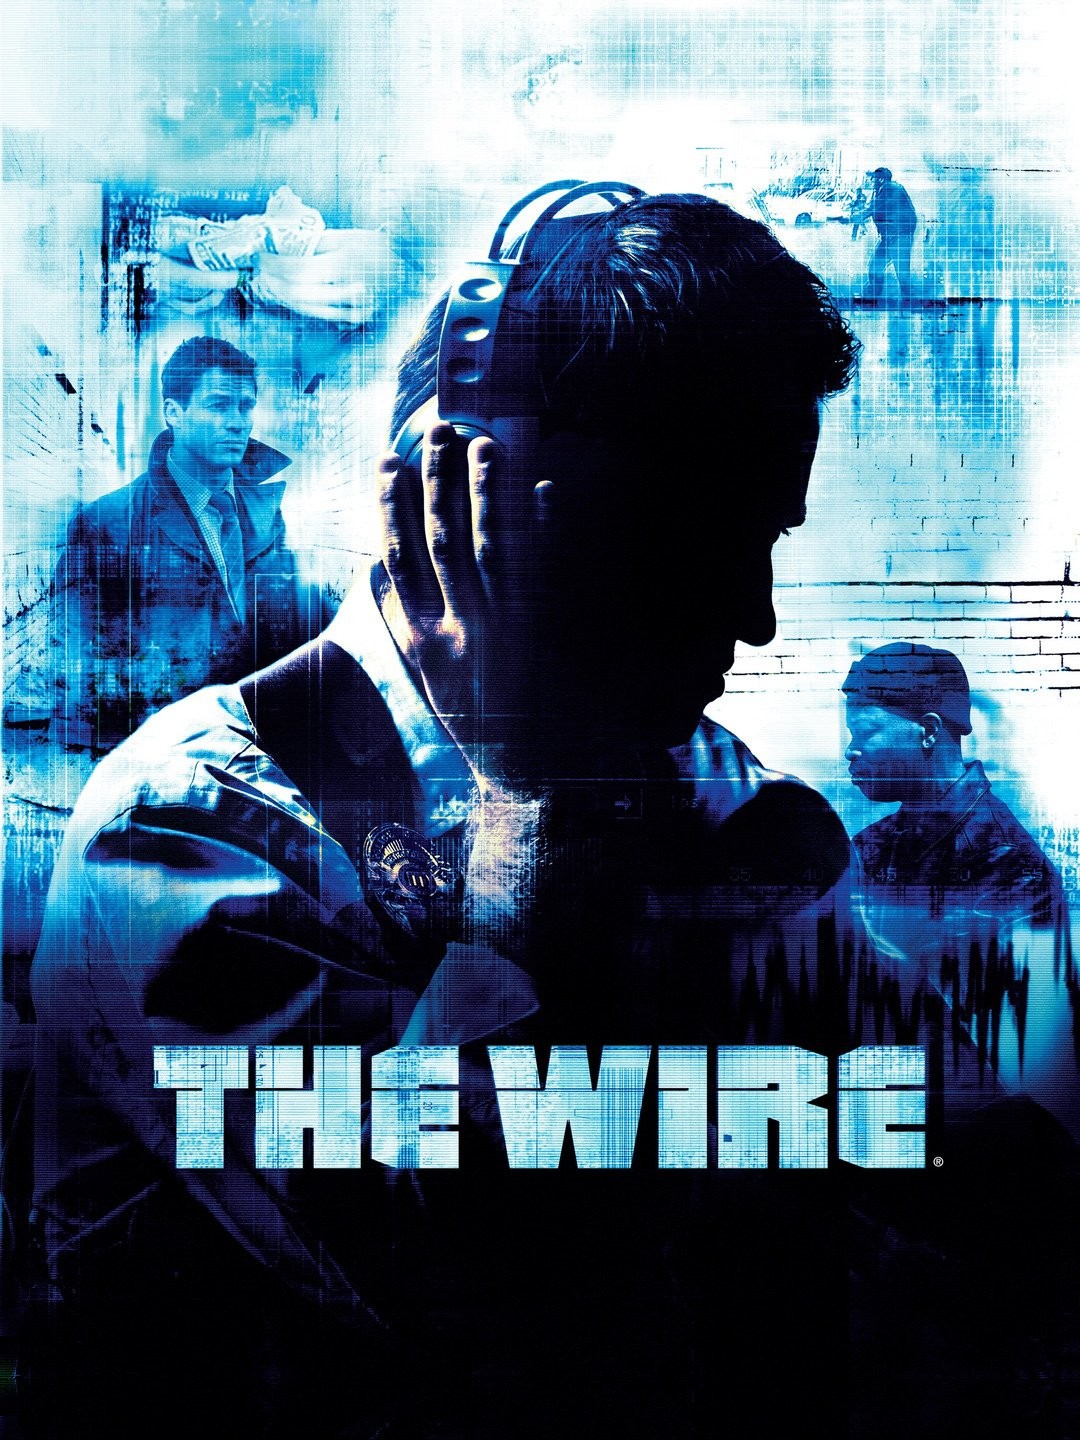 Watch The Wire Season 1 Episode 4 - Old Cases Online Now